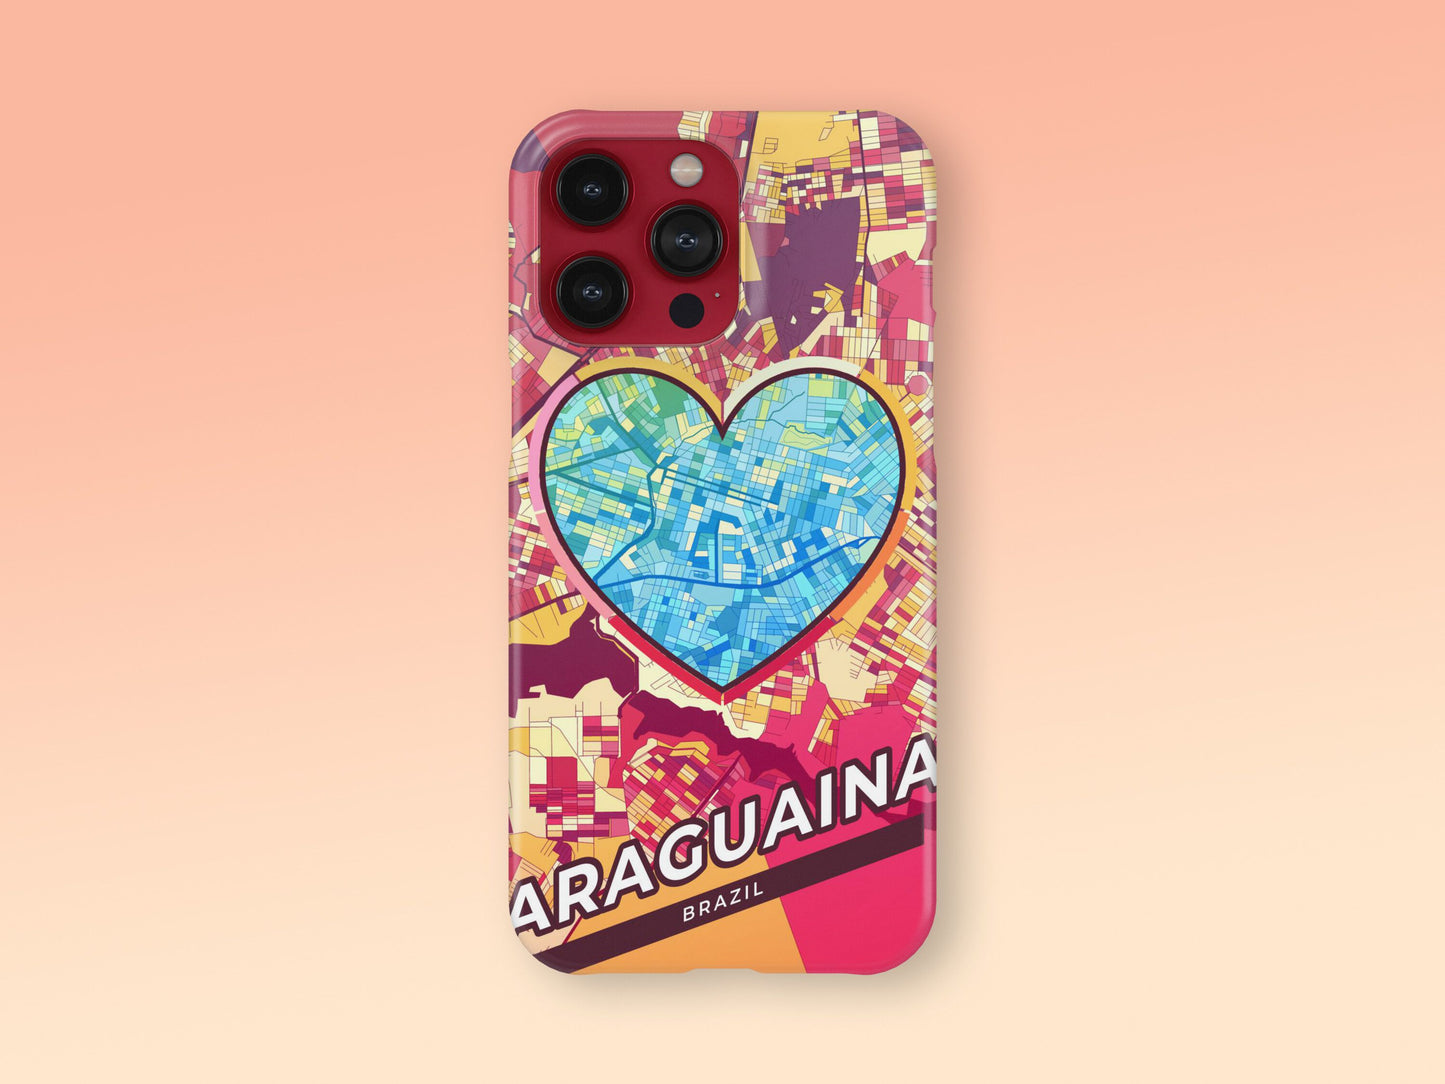 Araguaina Brazil slim phone case with colorful icon. Birthday, wedding or housewarming gift. Couple match cases. 2